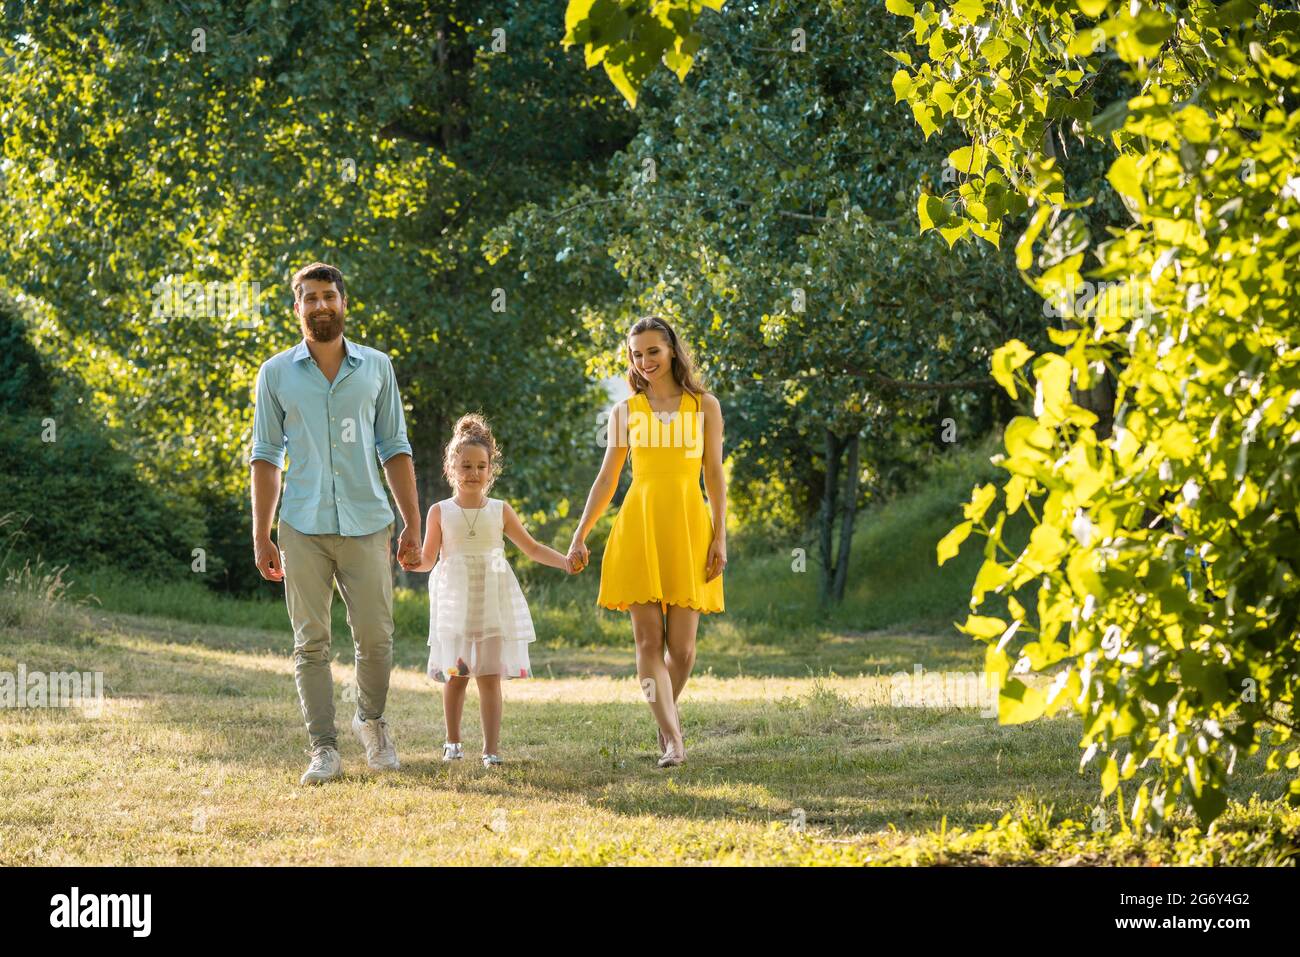 Beautiful caring parents holding the hands of their lovely daughter while walking together outdoors in the park in a perfect day of summer Stock Photo